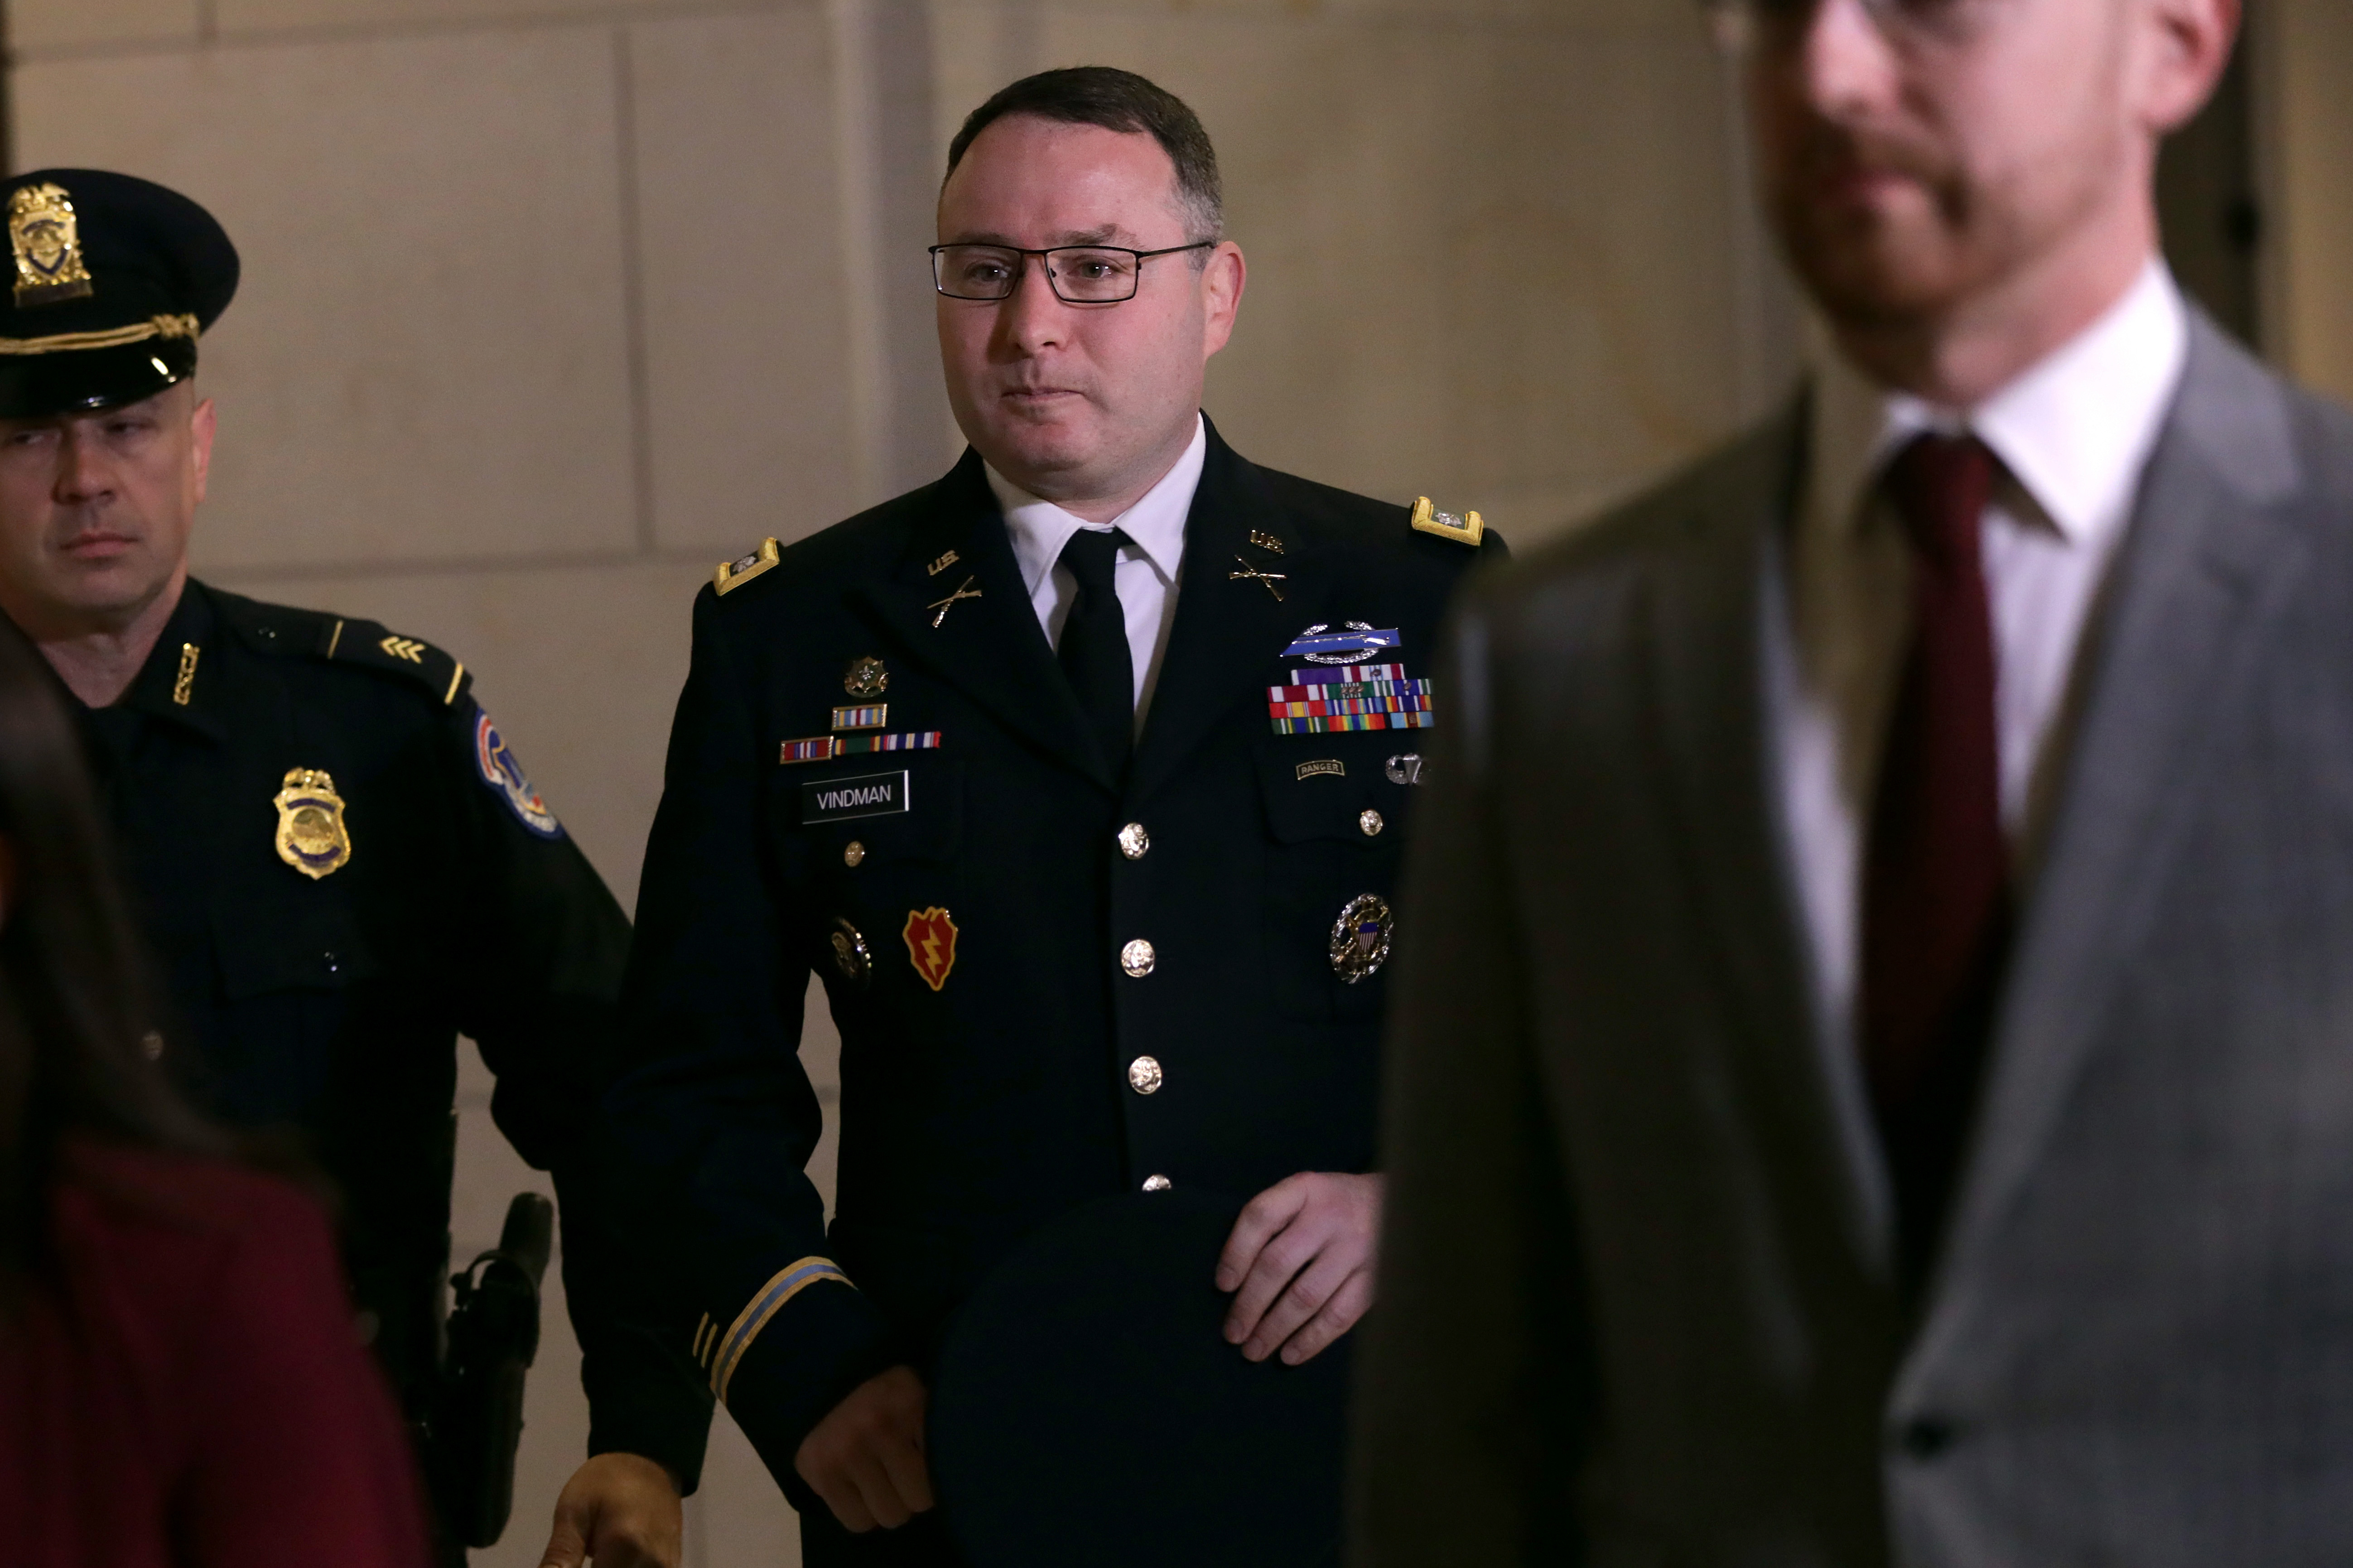 Army Lieutenant Colonel Alexander Vindman, Director for European Affairs at the National Security Council, arrives at a closed session before the House Intelligence, Foreign Affairs and Oversight committees on October 29, 2019.